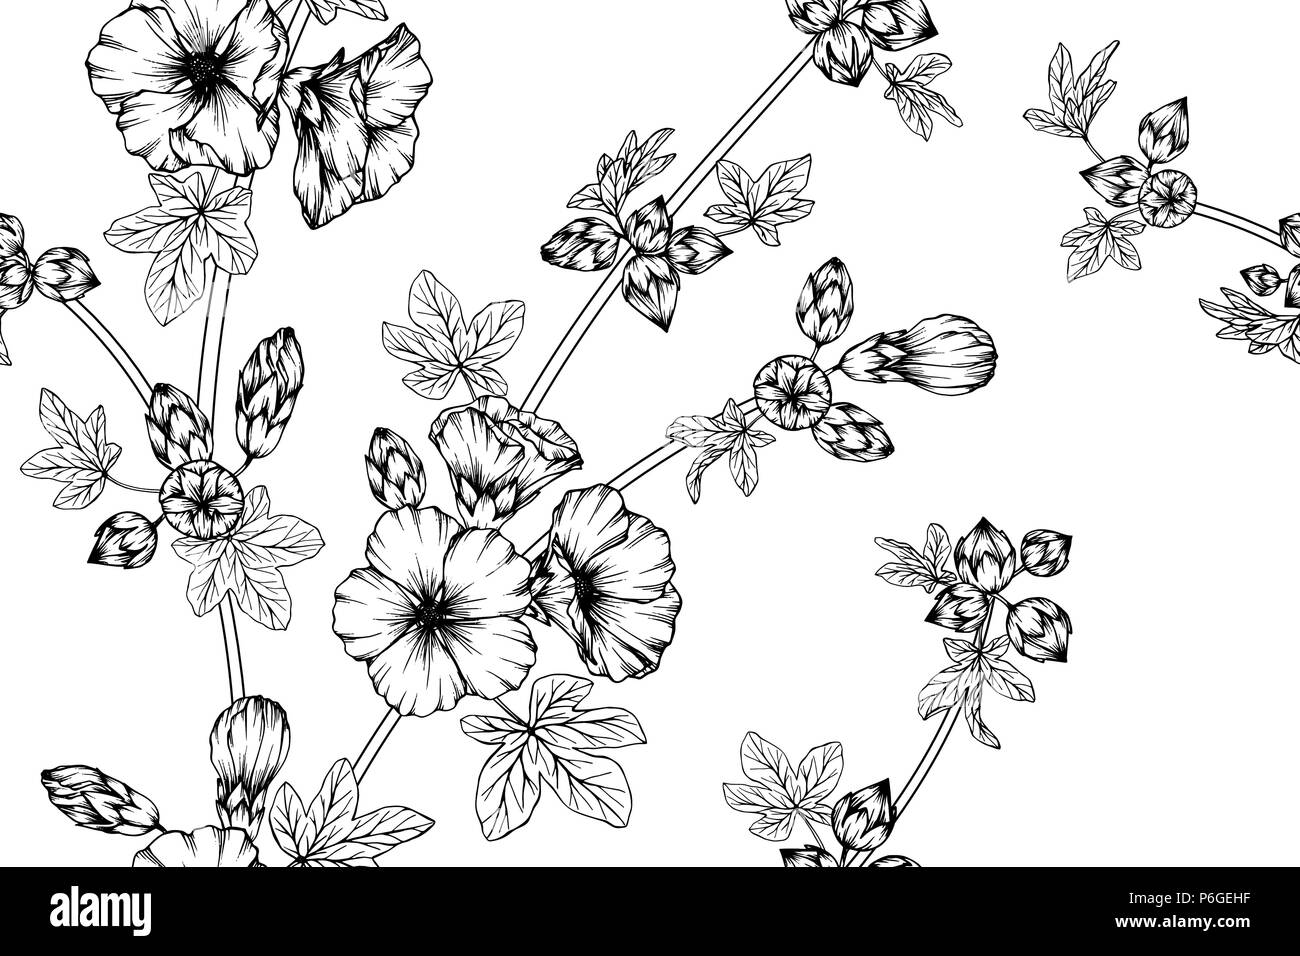 Seamless Hollyhock flower pattern background. Black and white with drawing line art illustration. Stock Vector